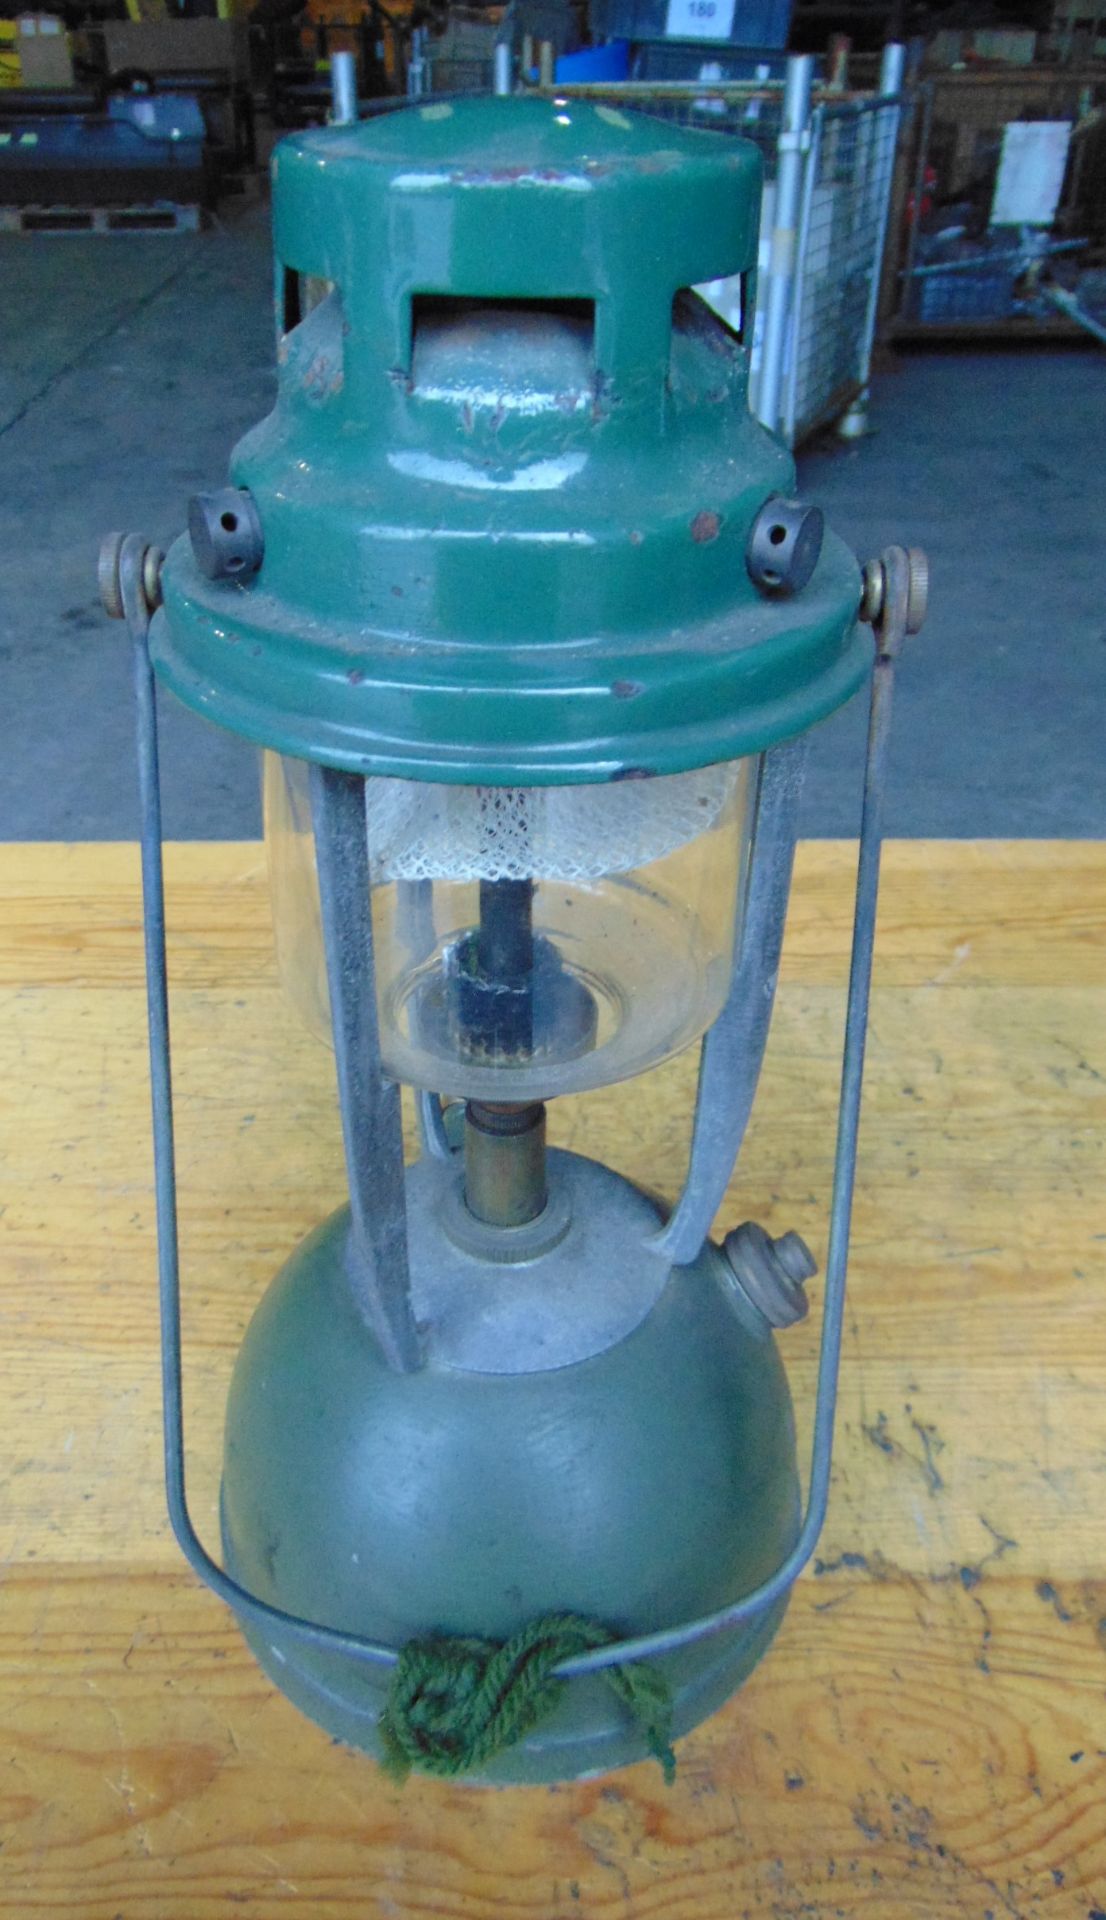 You are bidding on Vapalux British Army Tilley Lamp - Image 3 of 5